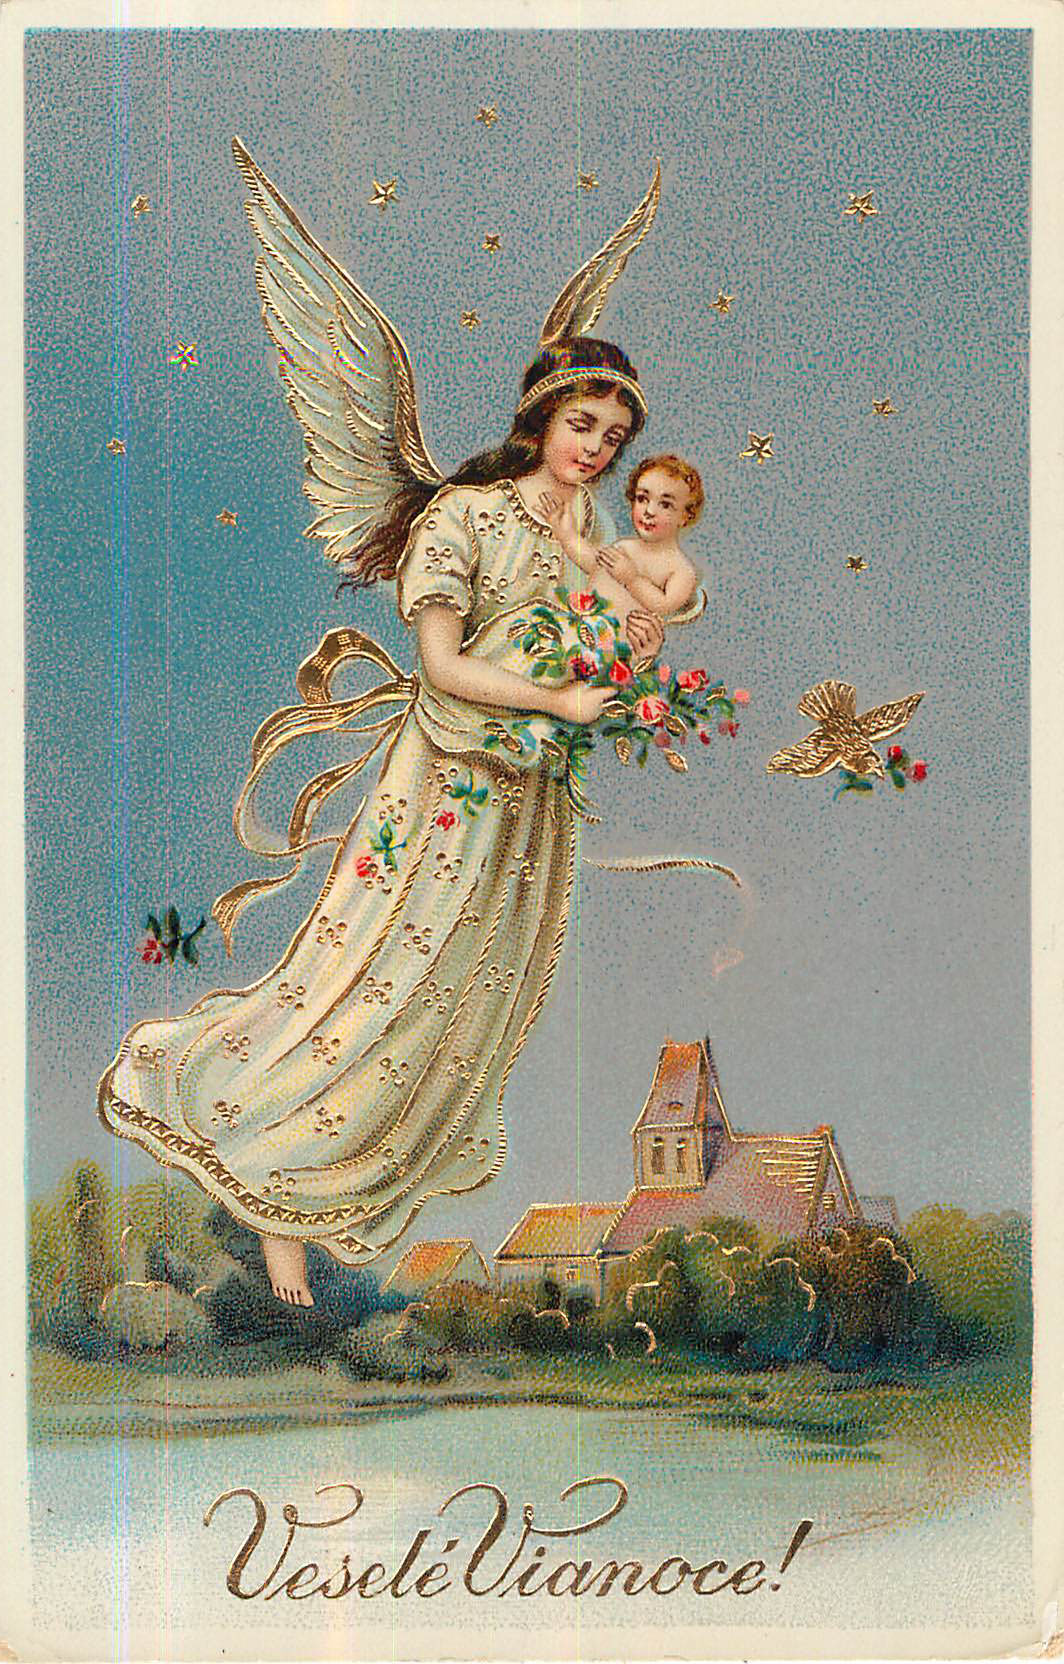 Vesele Vianoce! Angel holding small child, house in background